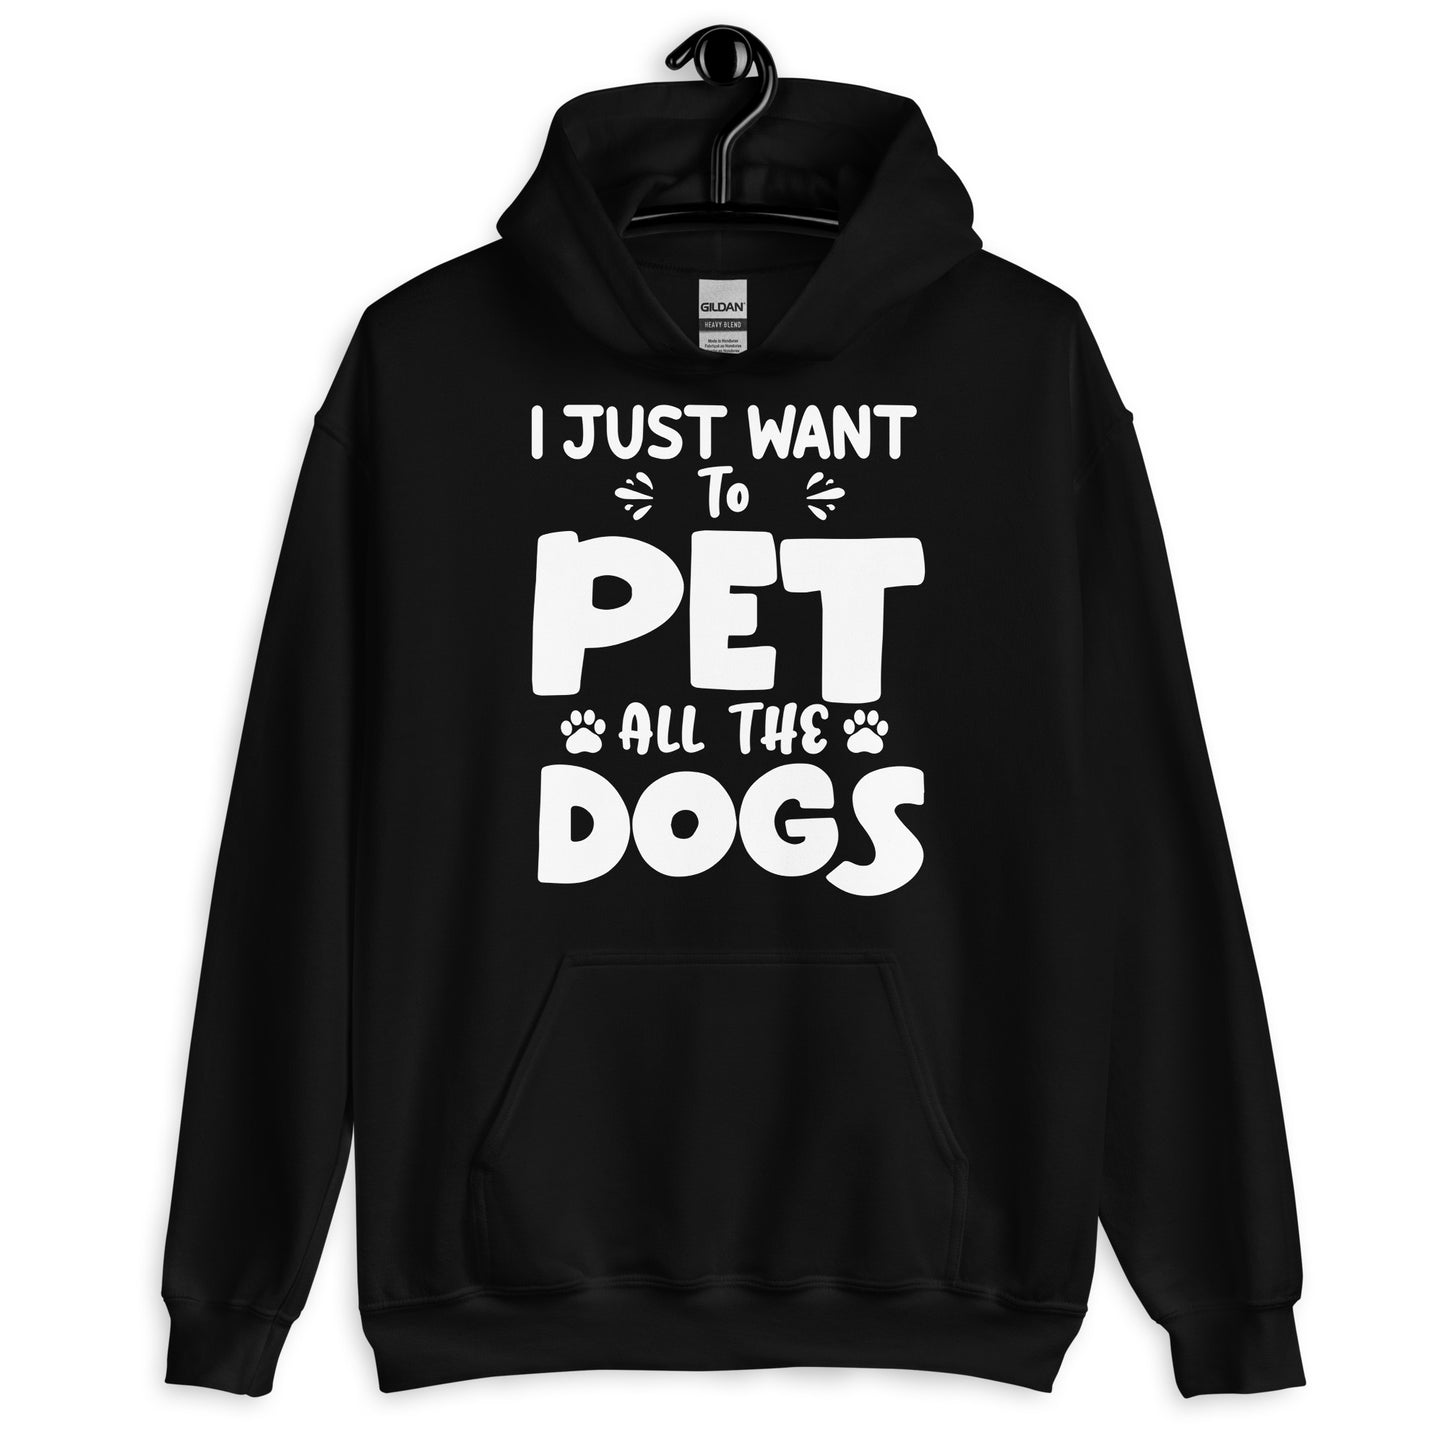 I Just Want to Pet All The Dogs Hoodie